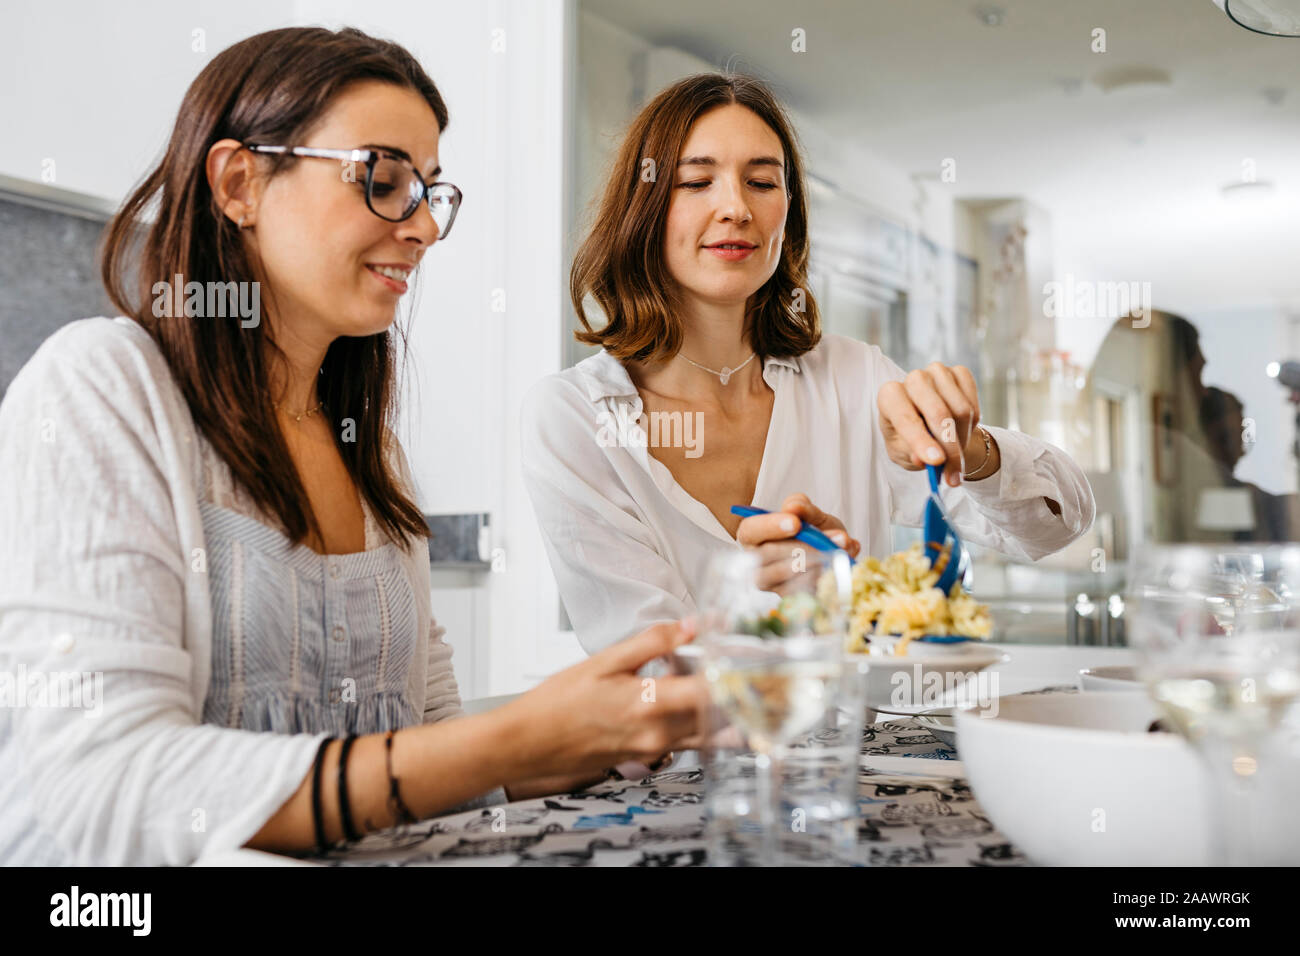 Two friends having healthy lunch together Stock Photo